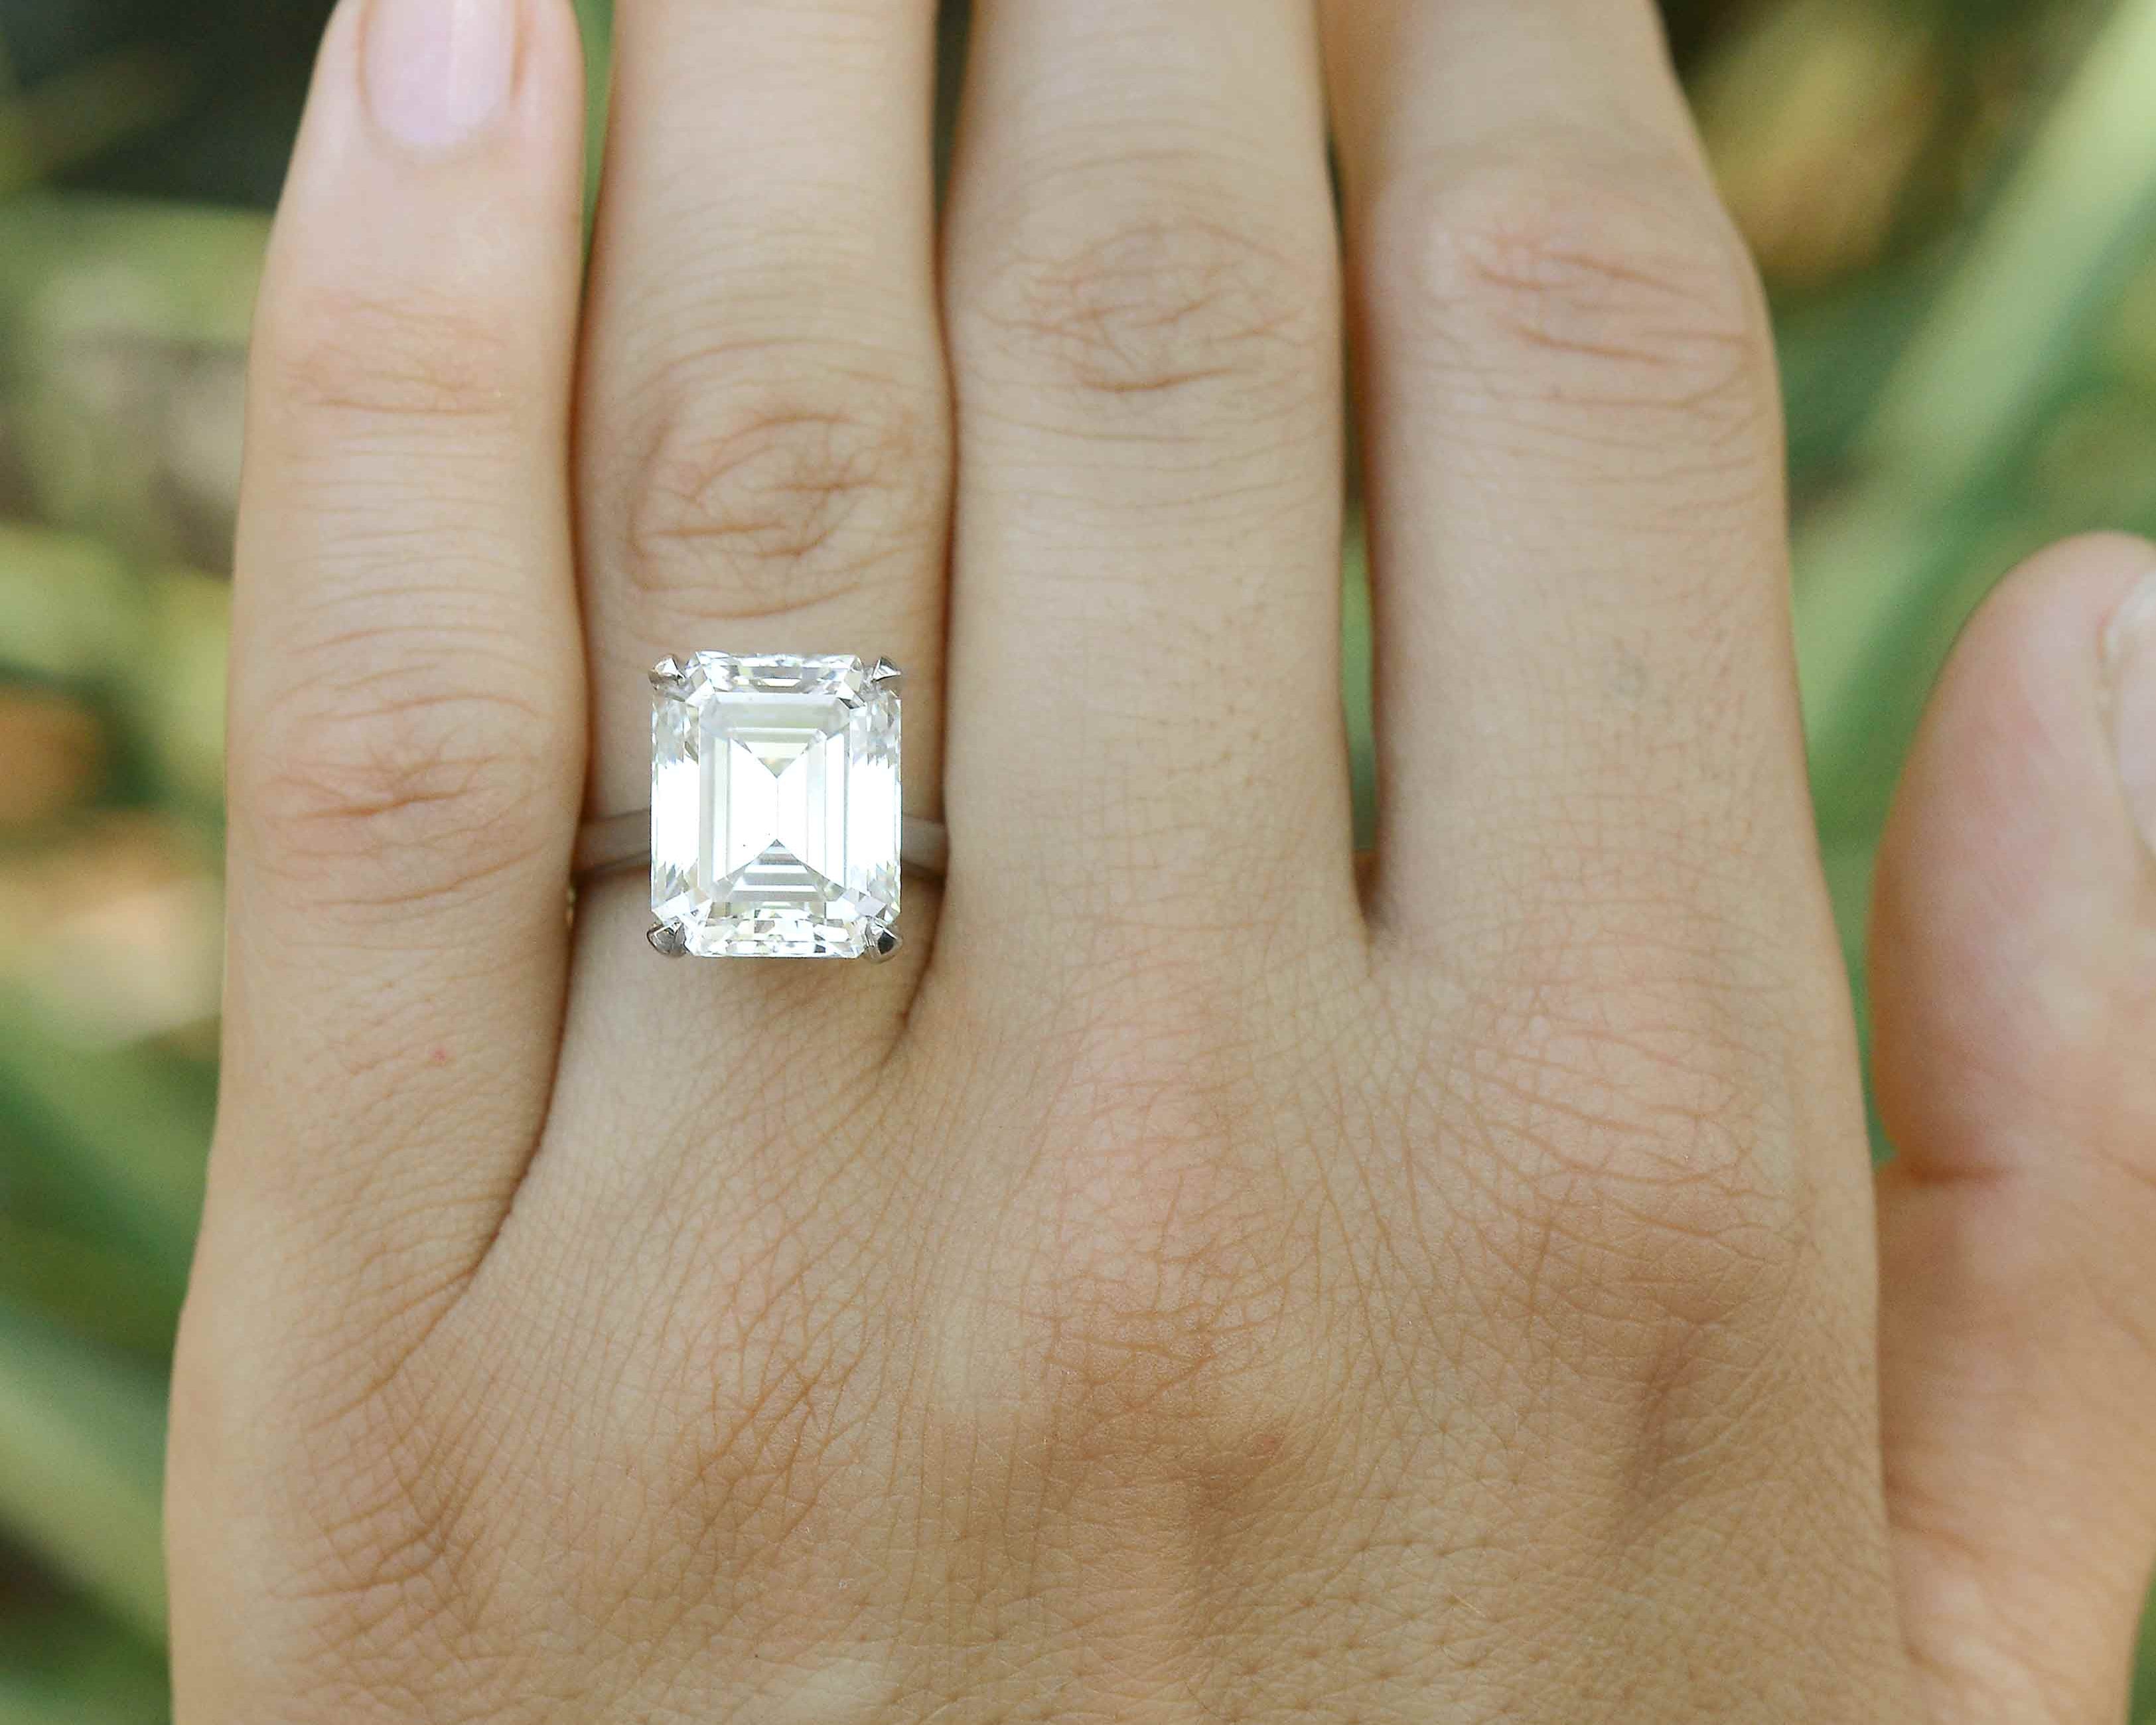 A giant emerald cut diamond set in a 4 prong soltaire setting.